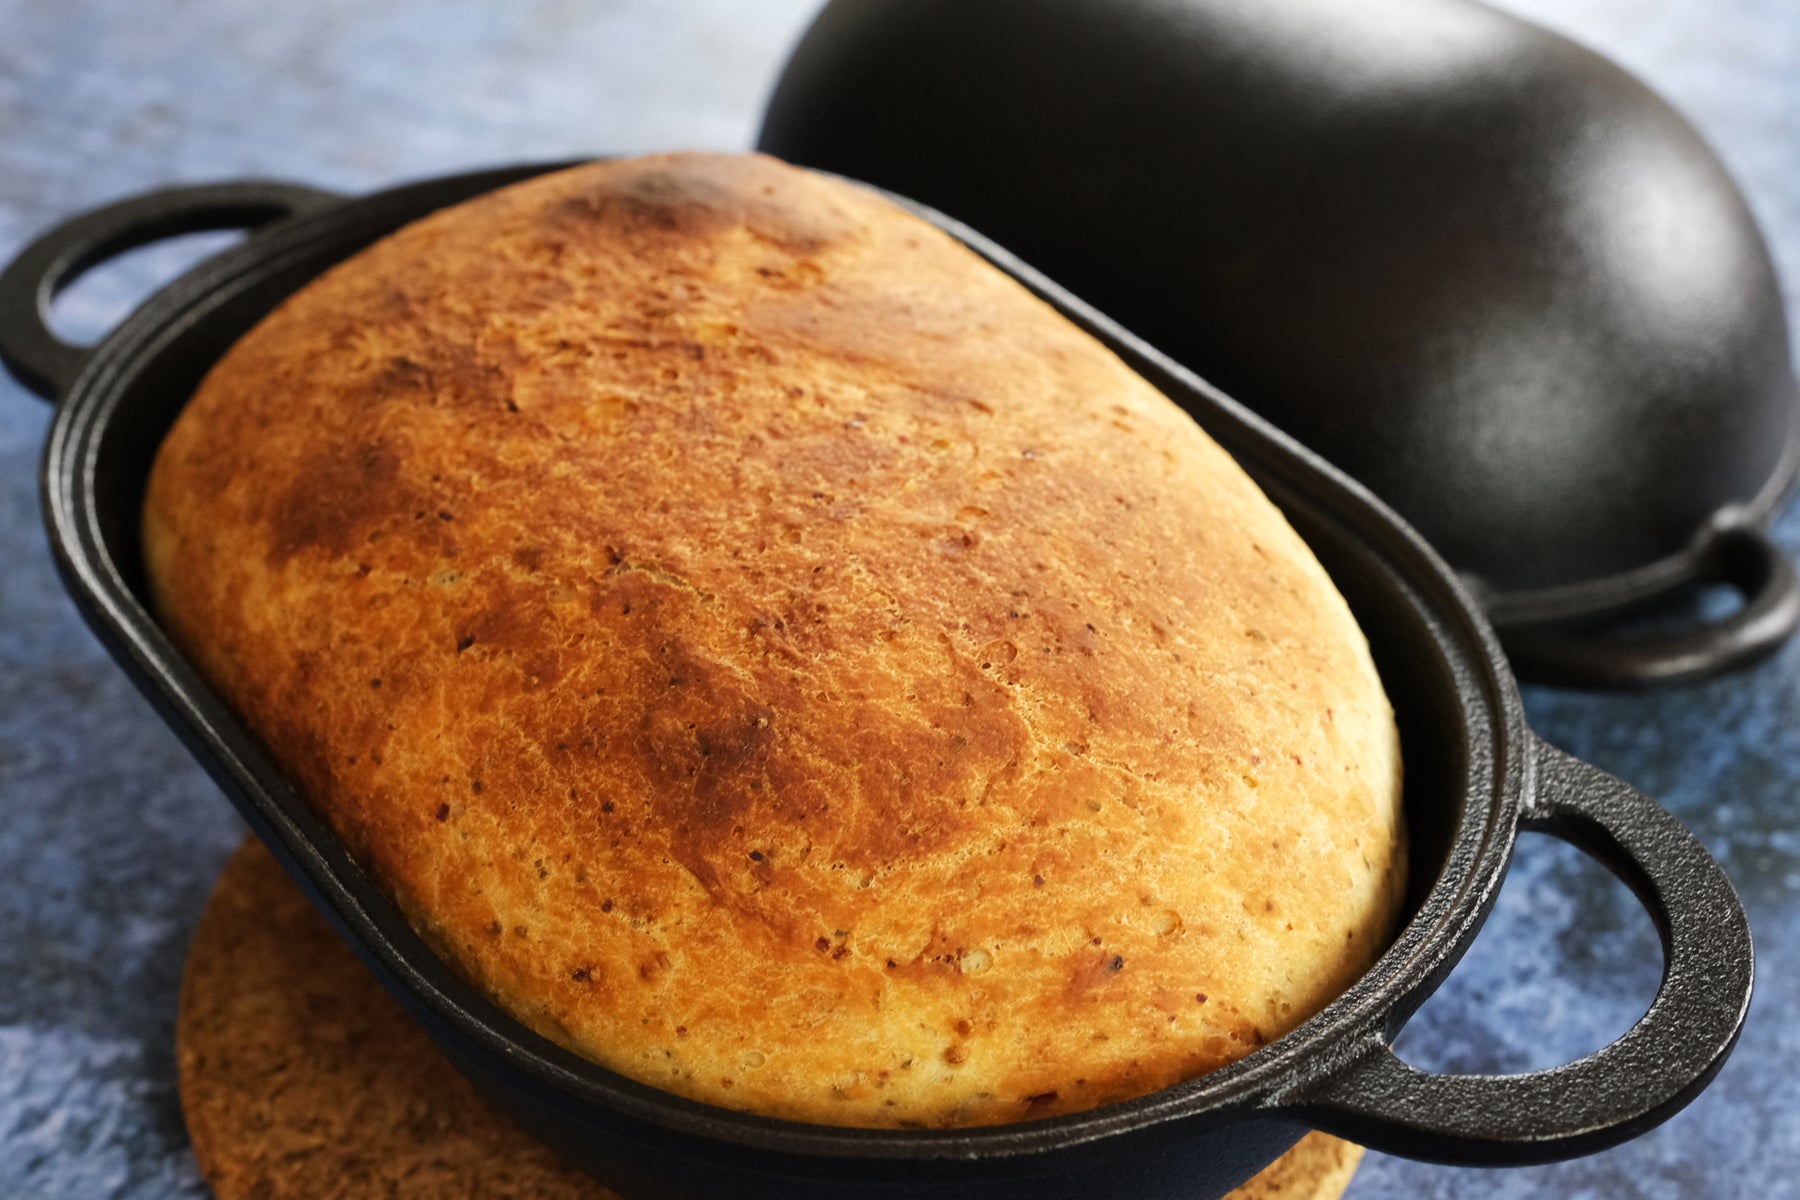 Outdoor Baked Bread in a Cast Iron Camp Dutch Oven – Crucible Cookware